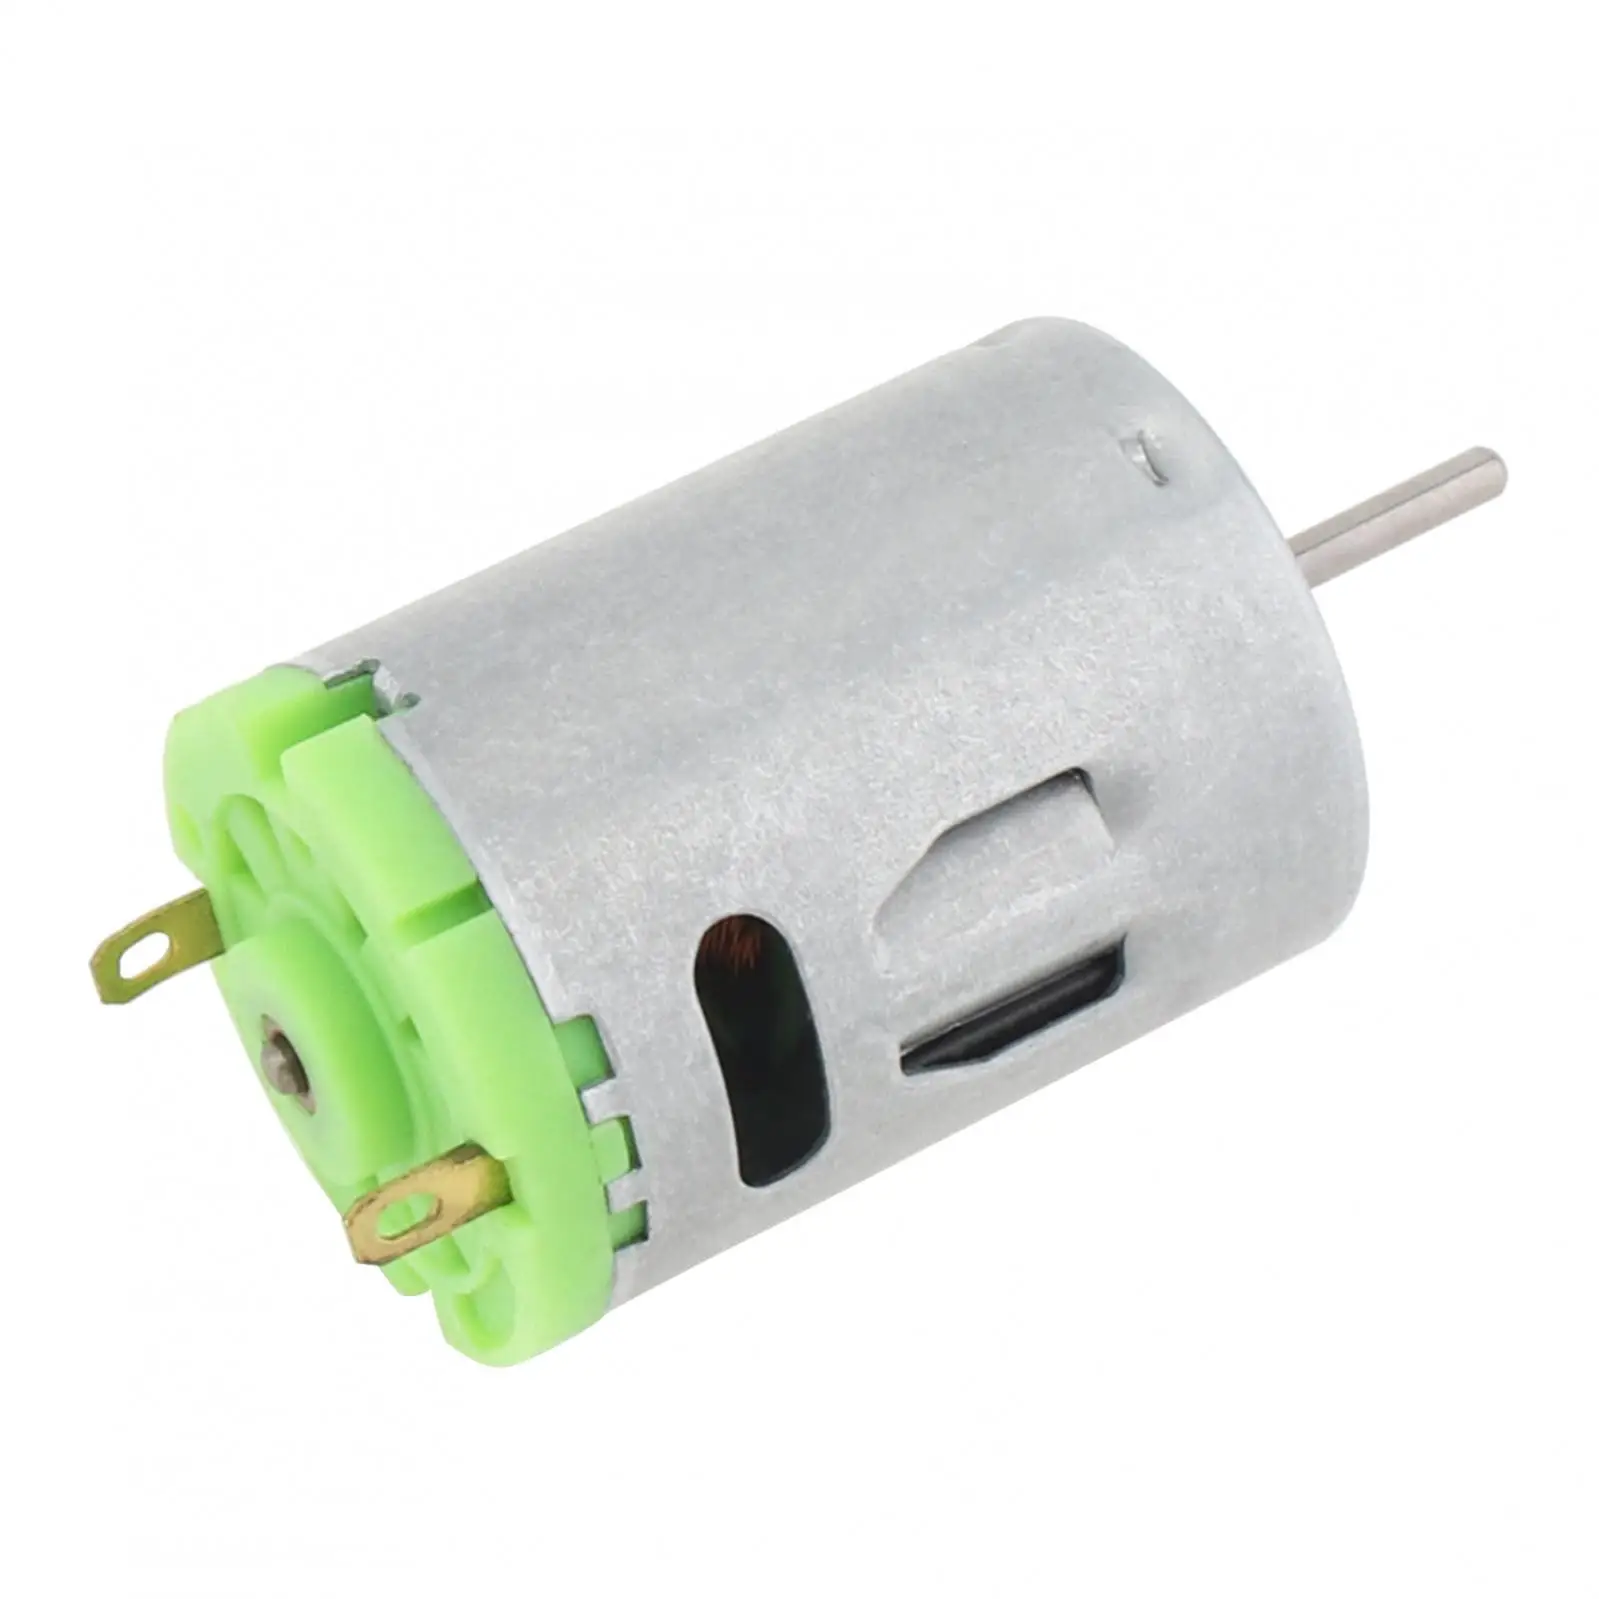 RS380 6-24V DC Motor 24000RPM High Speed Micro Motor Stainless Steel Motor for DIY Toy Hair Drier Mini Fans Small Appliance